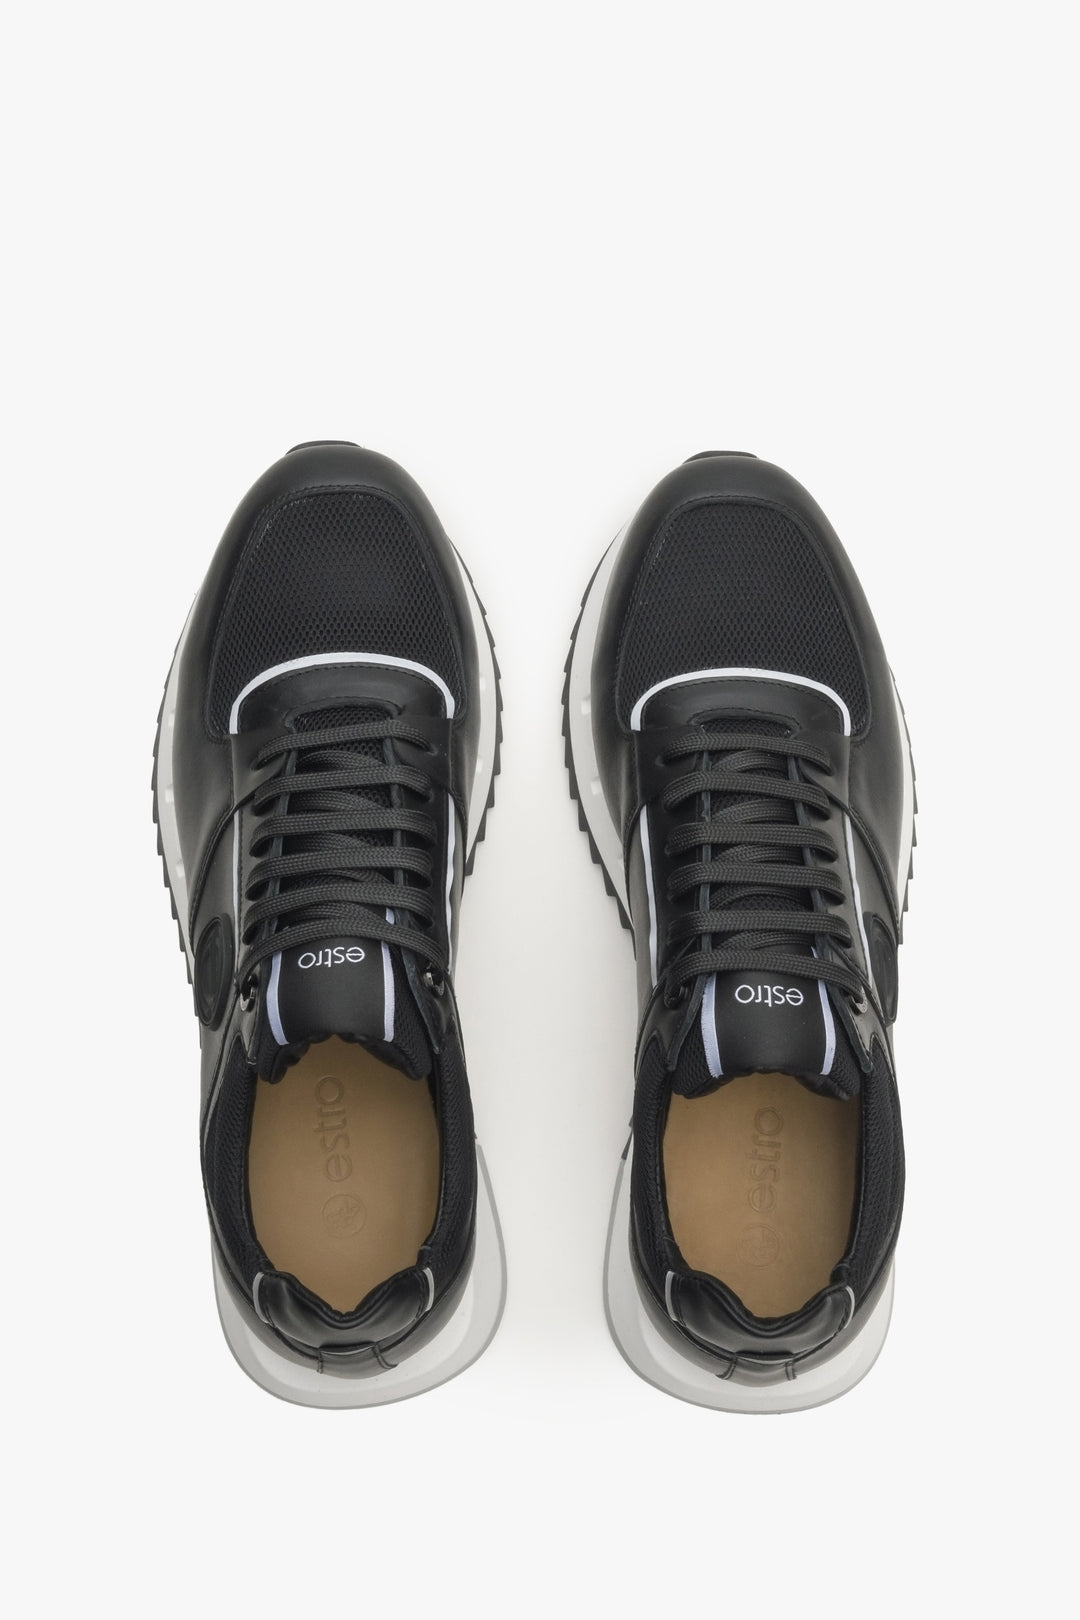 Men's black sneakers made of leather and textiles - top view presentation of the footwear.